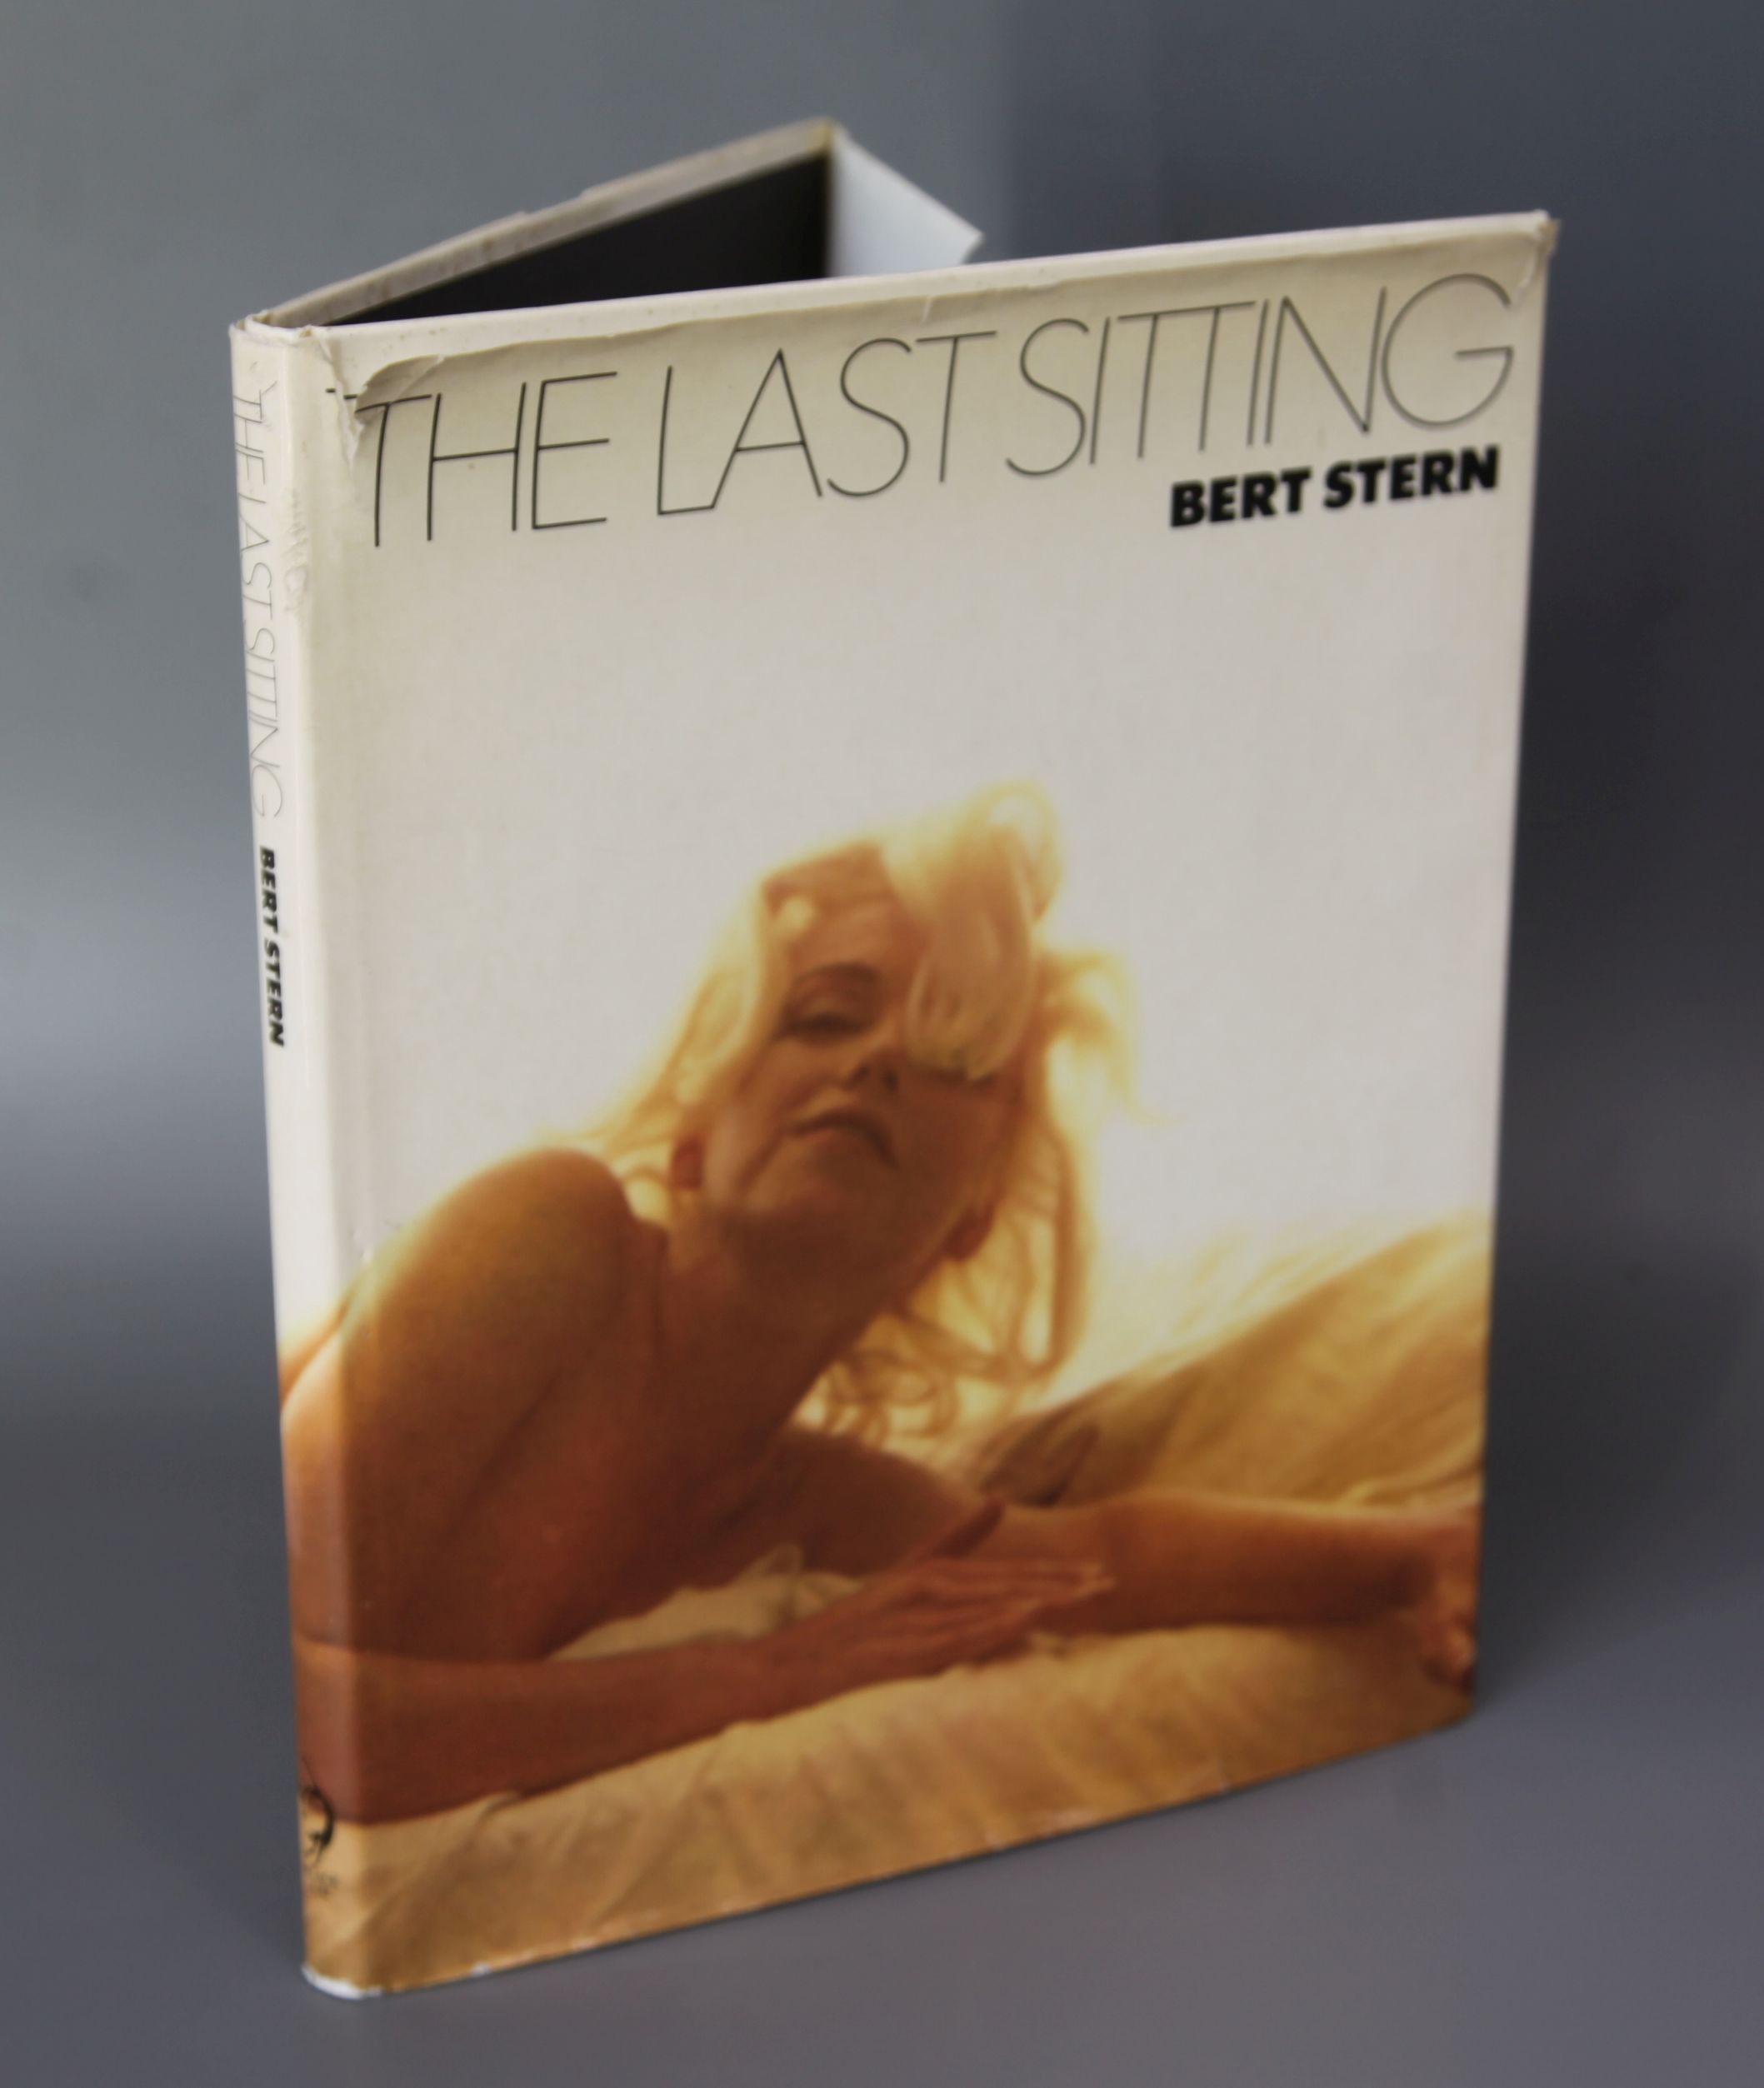 Stern, Bert - The Last Sitting, folio, photographic boards, with d.j's with slight tears, London